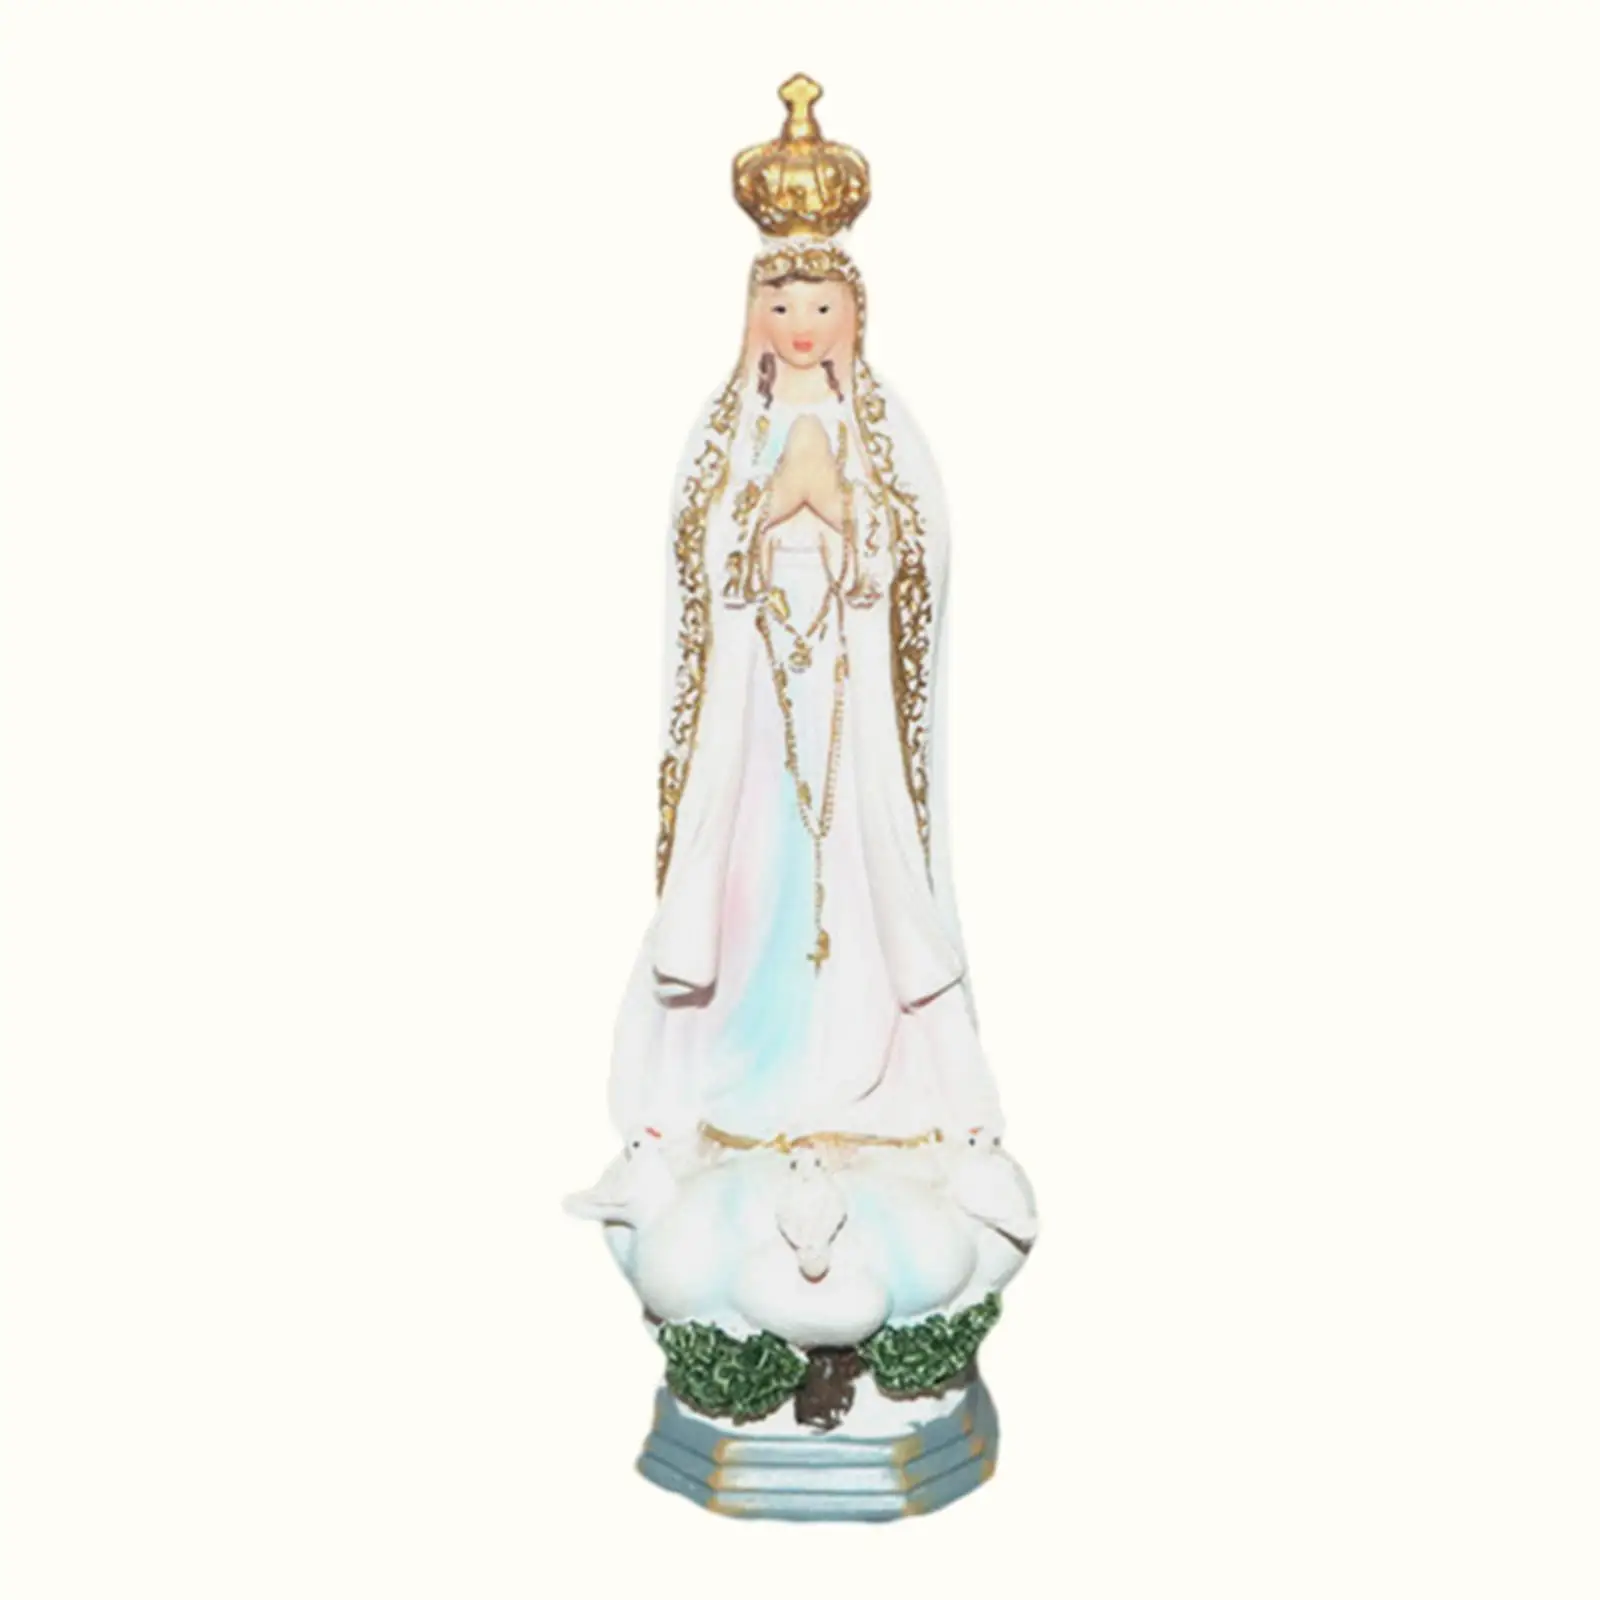 Mother Mary Figurine on Base Statues Ornament for Living Room Shelf Home